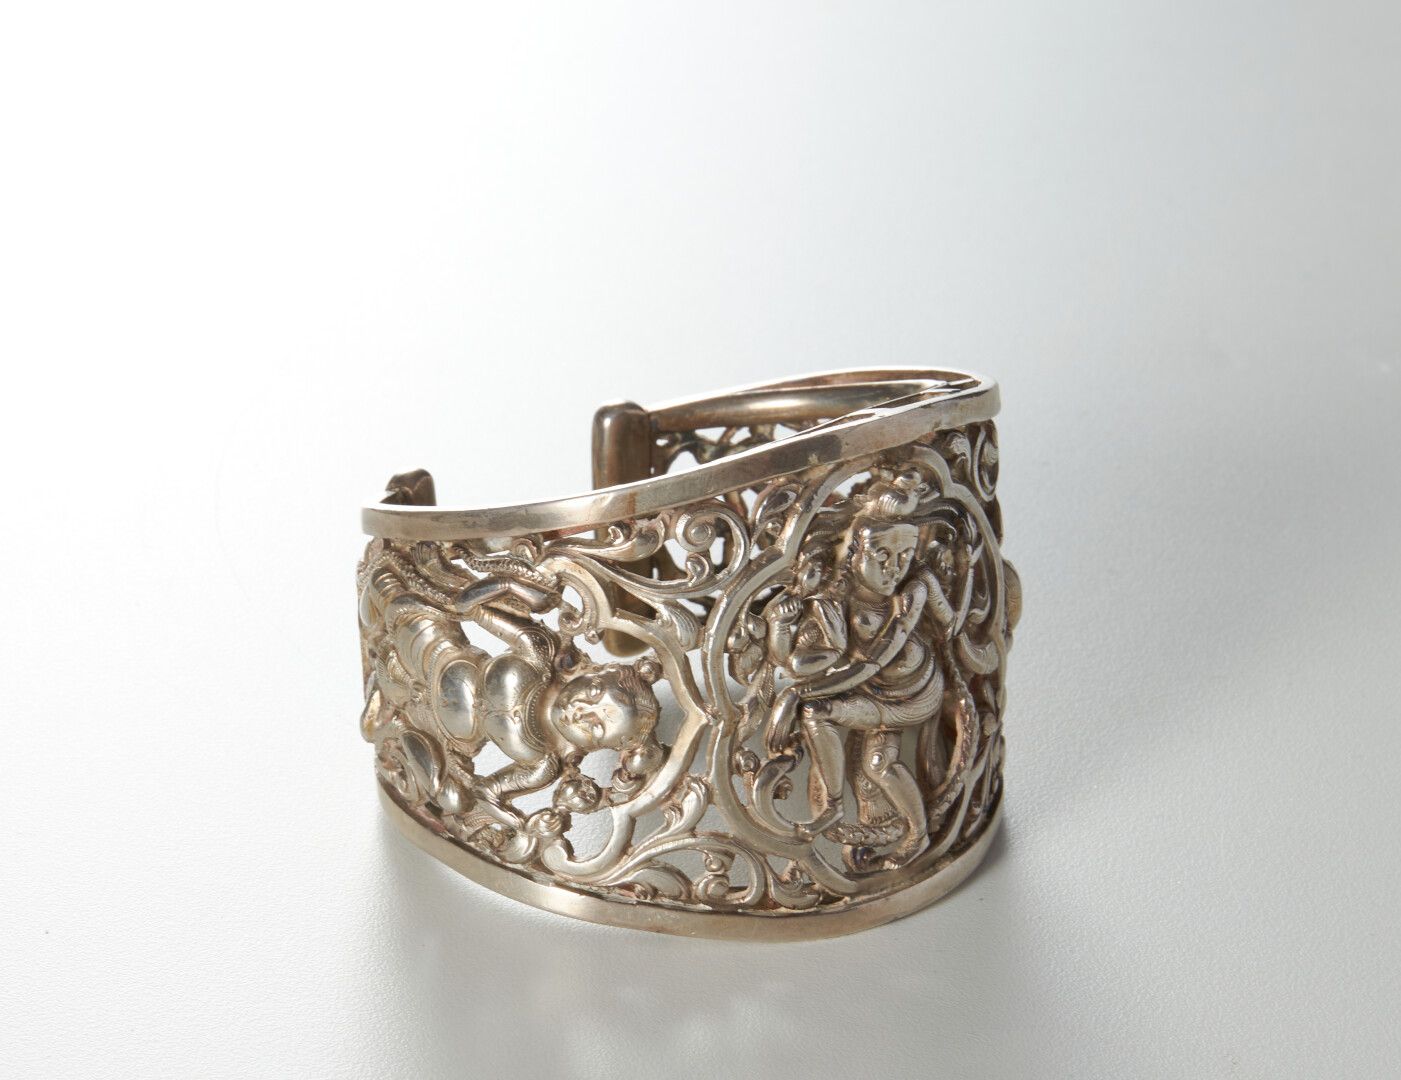 Null A silver cuff bracelet. Indian work - weight : 118g